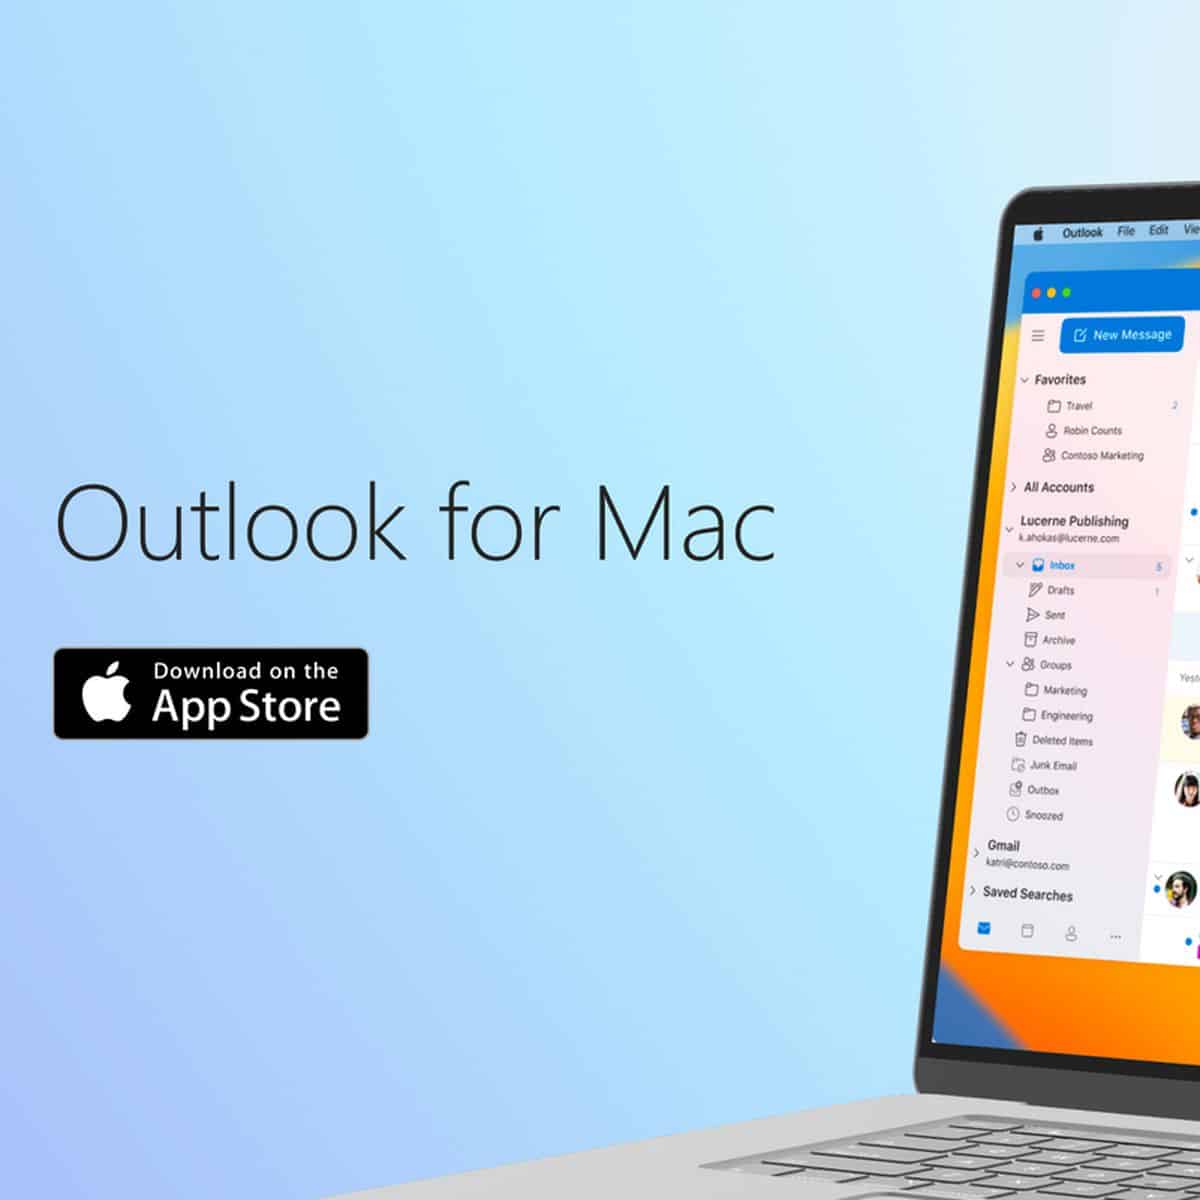 Outlook support for Mac